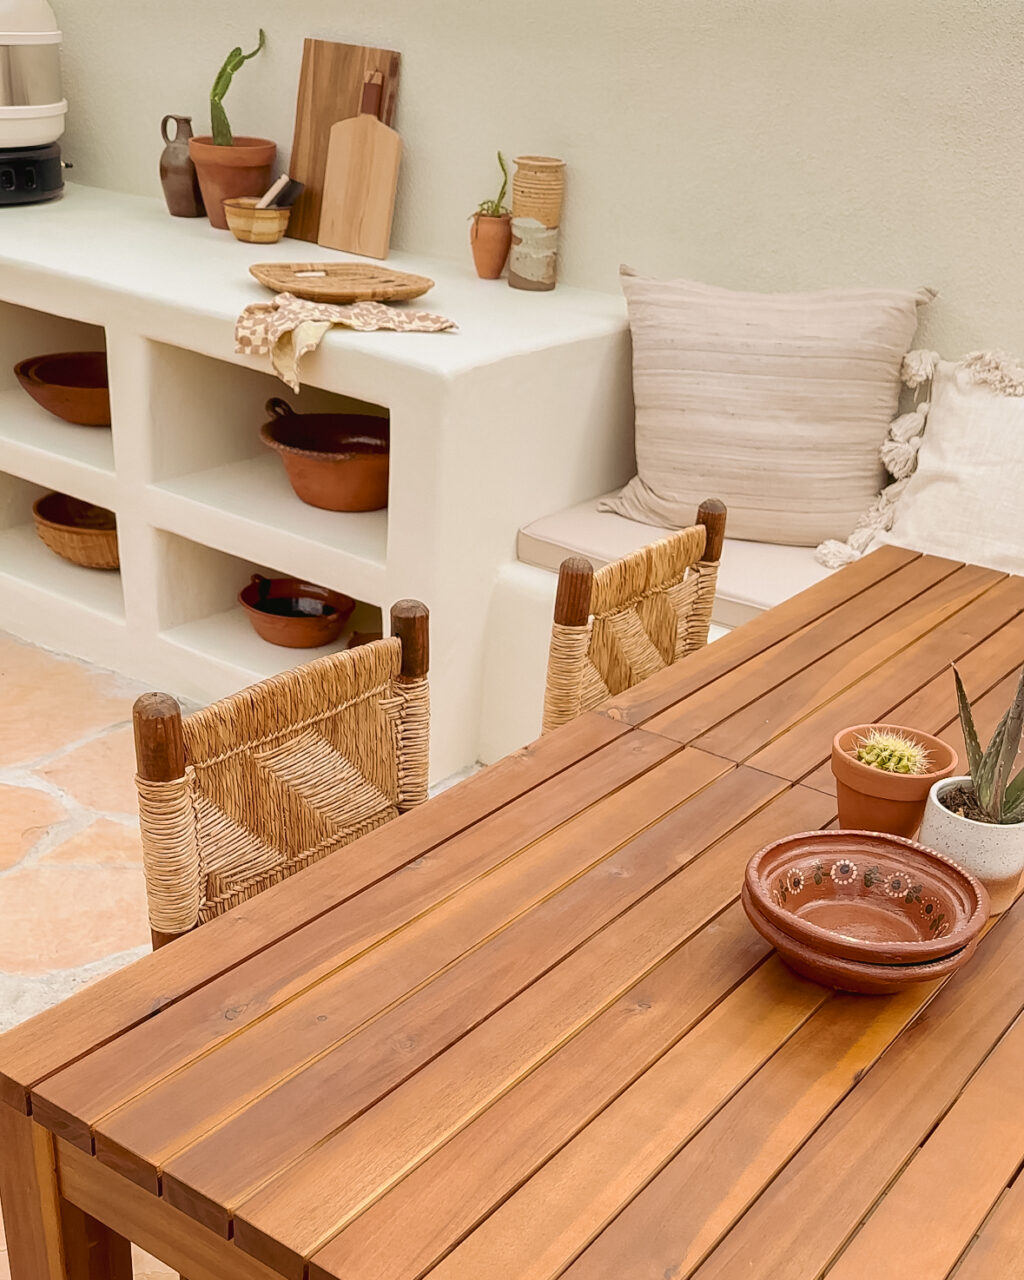 outdoor kitchen - stucco Mediterranean style - southwest desert backyard - wooden table and woven chairs